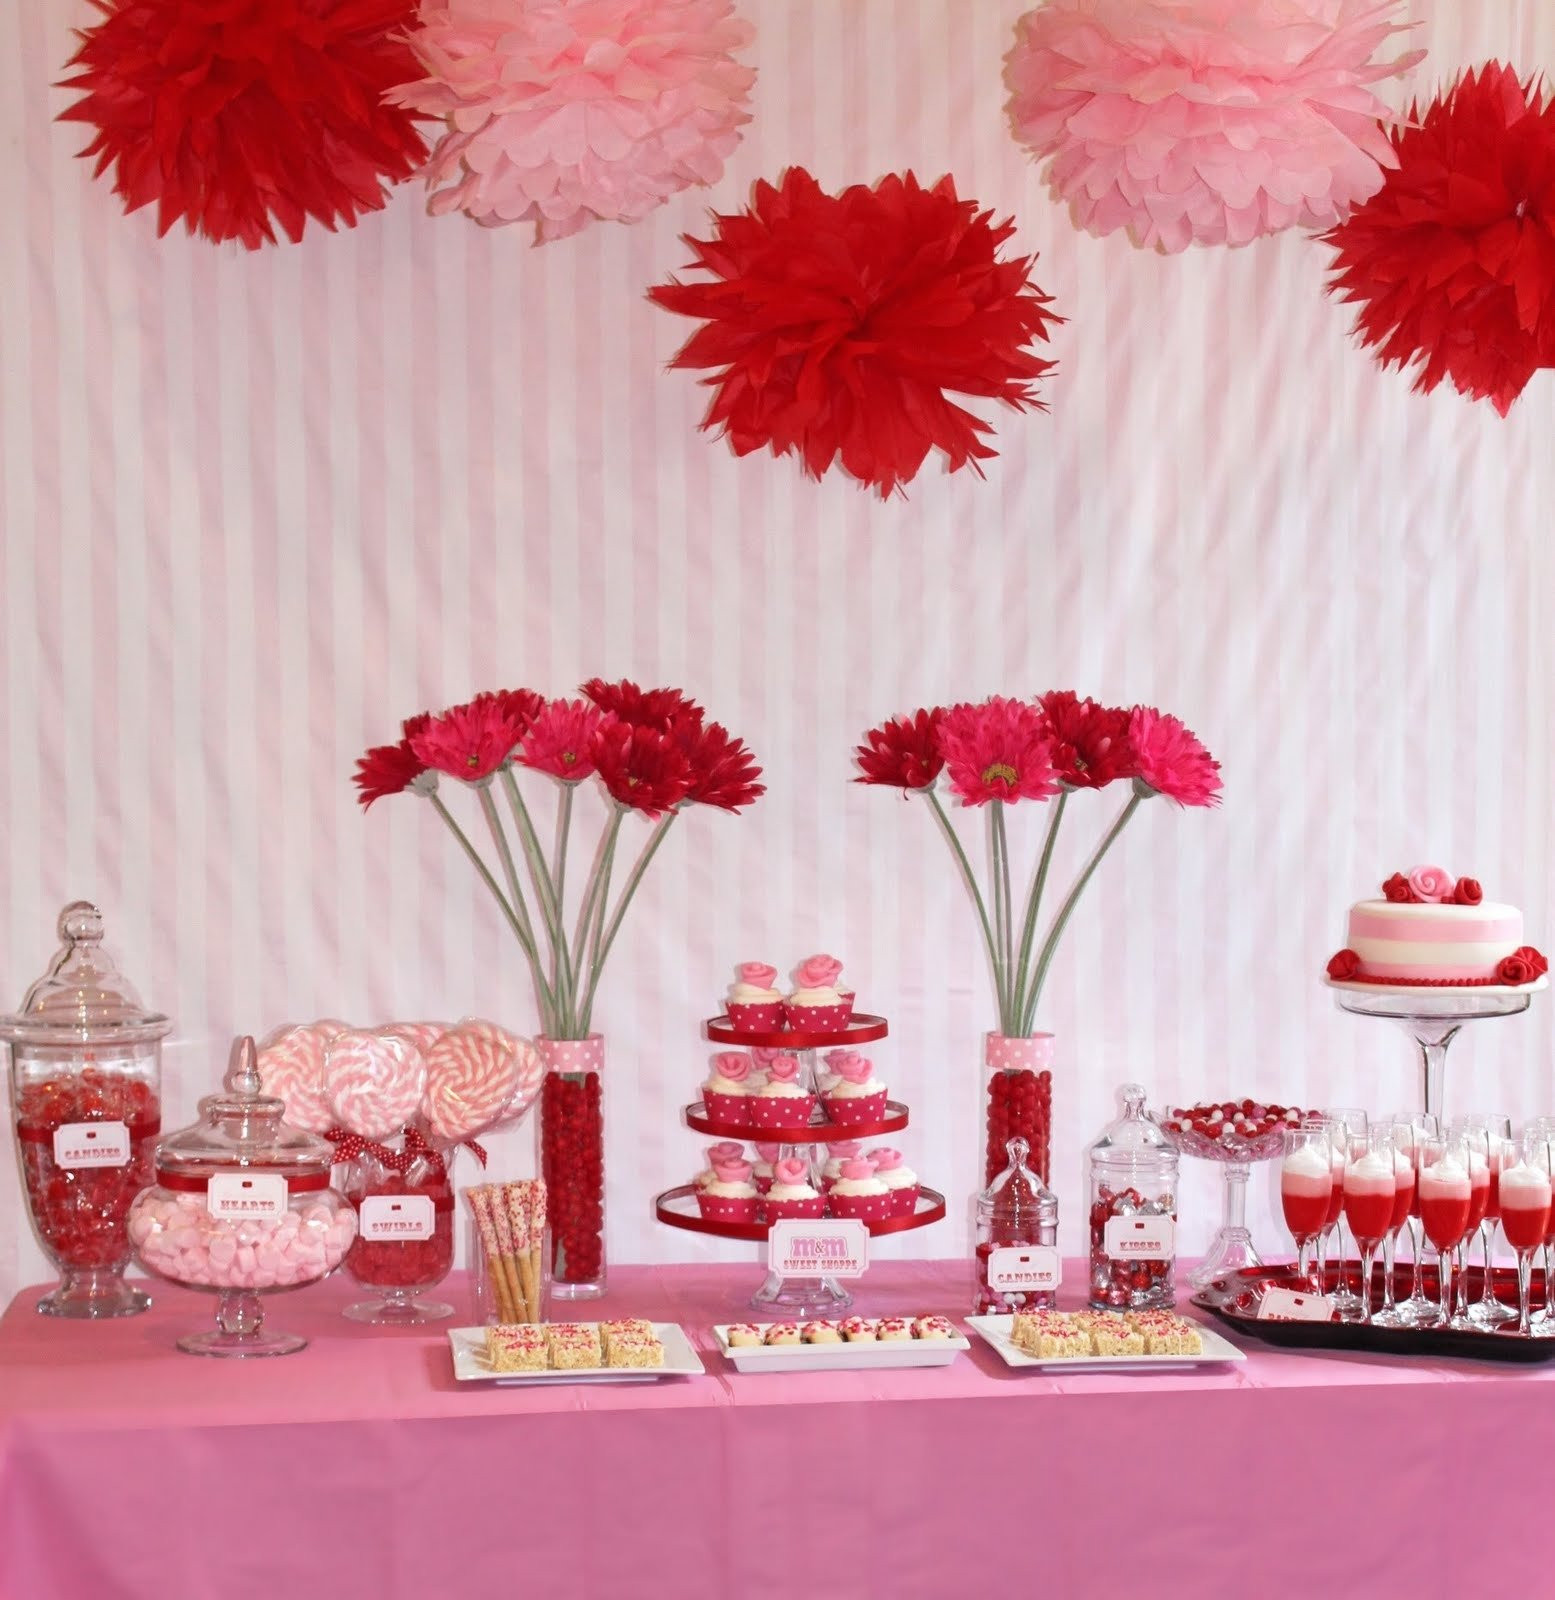 Valentines Day Party Ideas For Adults
 10 Unique Valentine Day Party Ideas For Adults 2020